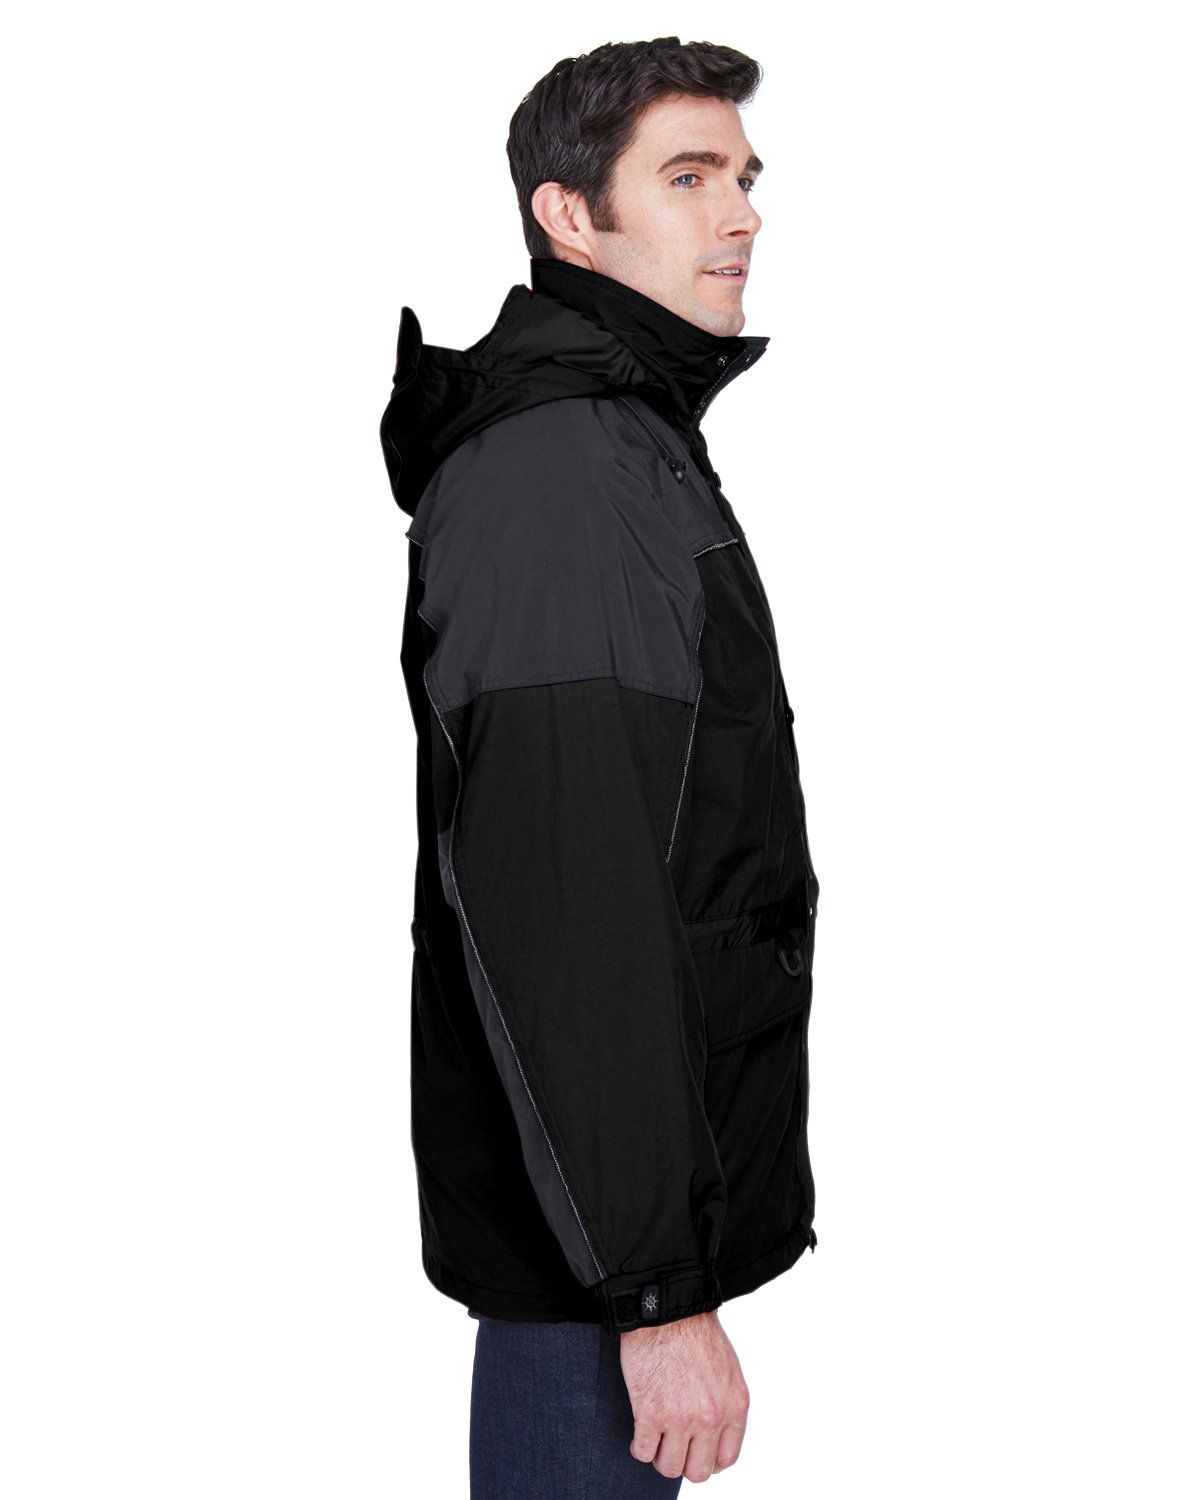 'Ash City - North End 88006 Adult 3-in-1 Two-Tone Parka'